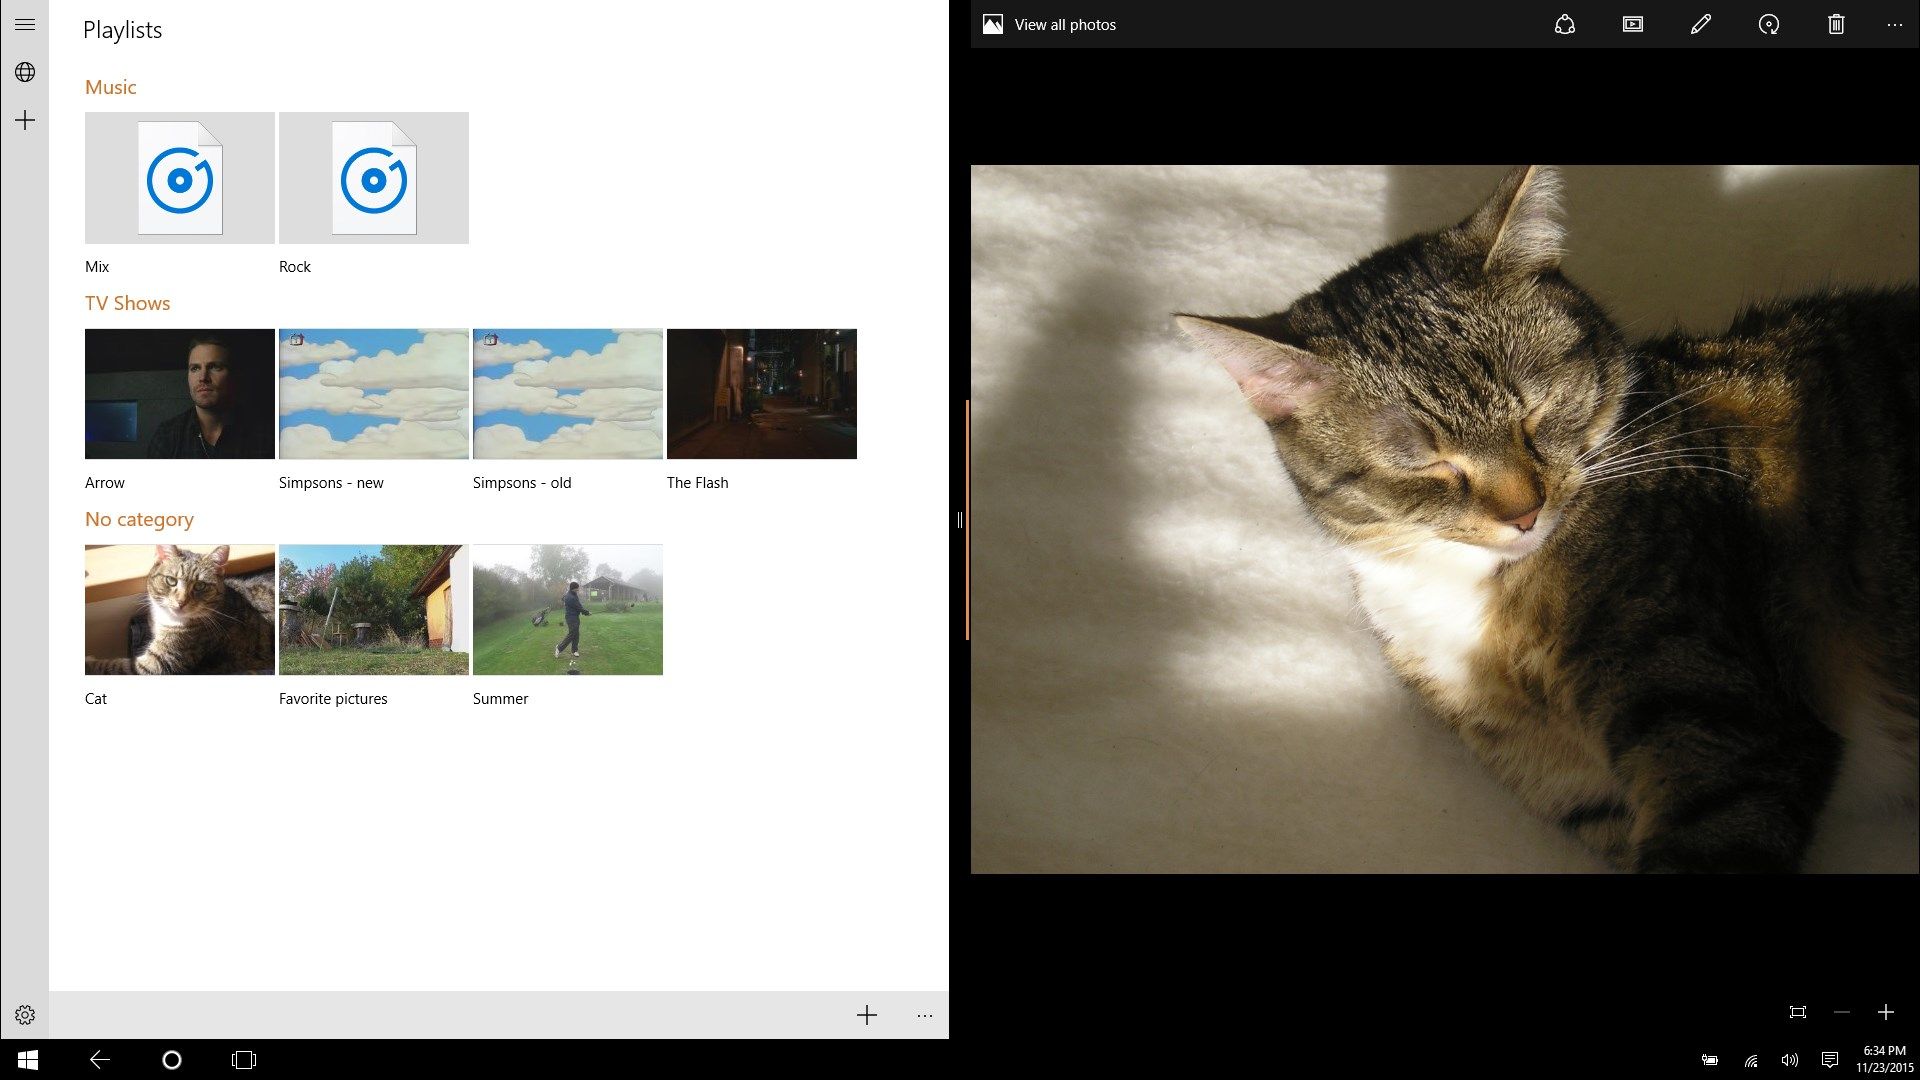 Showing random picture from the "Cat" playlist. The screen shows default page.